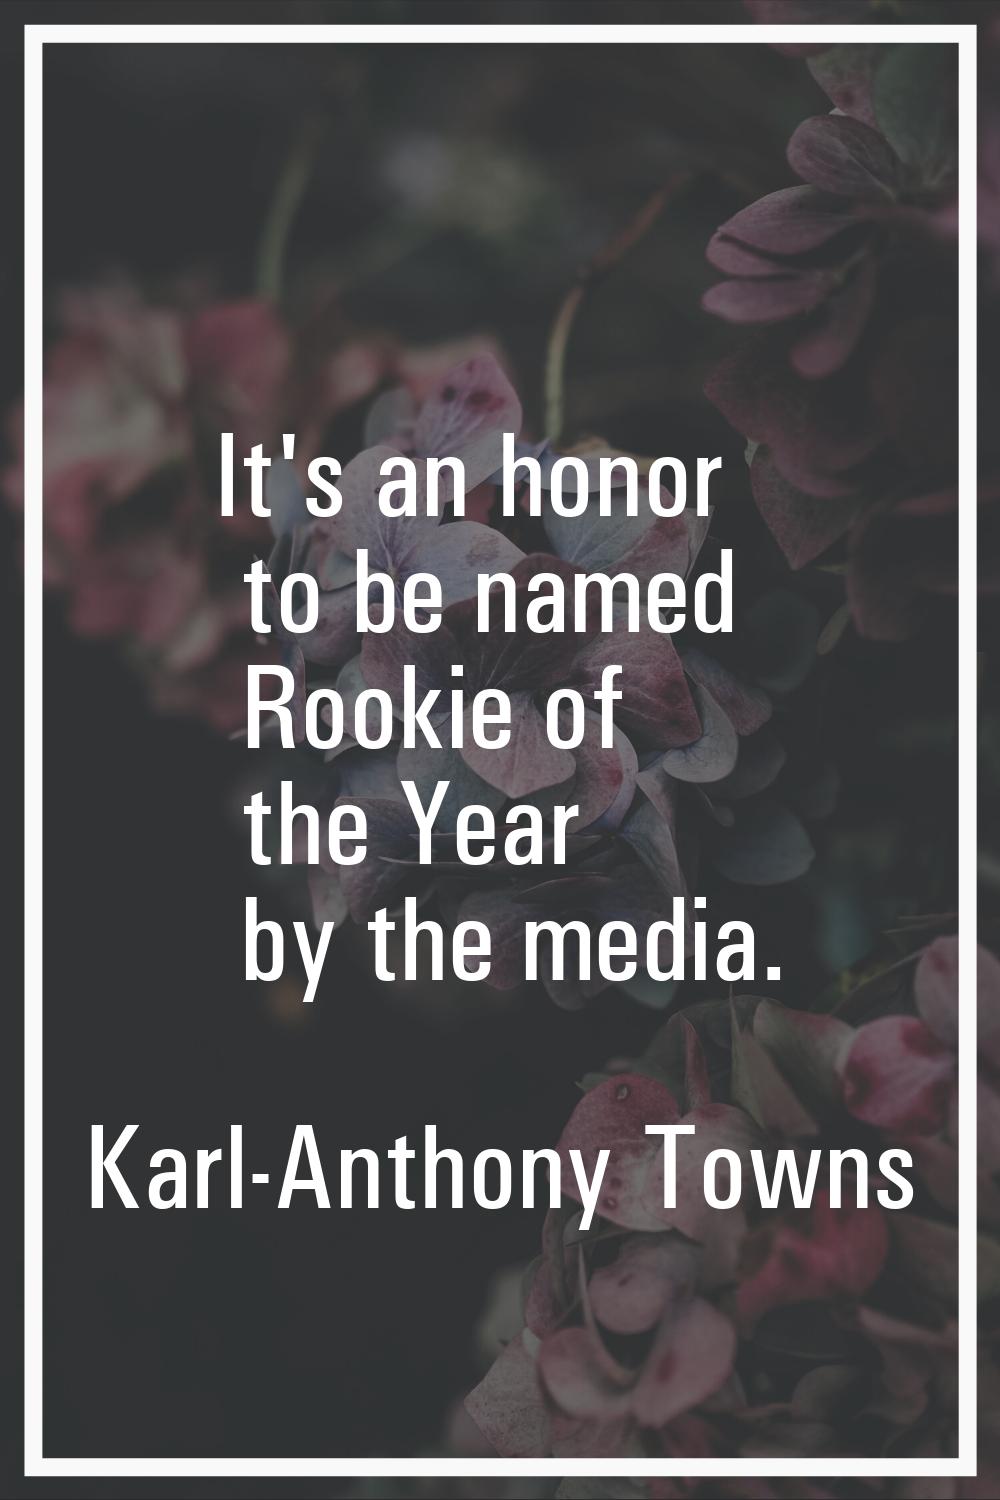 It's an honor to be named Rookie of the Year by the media.